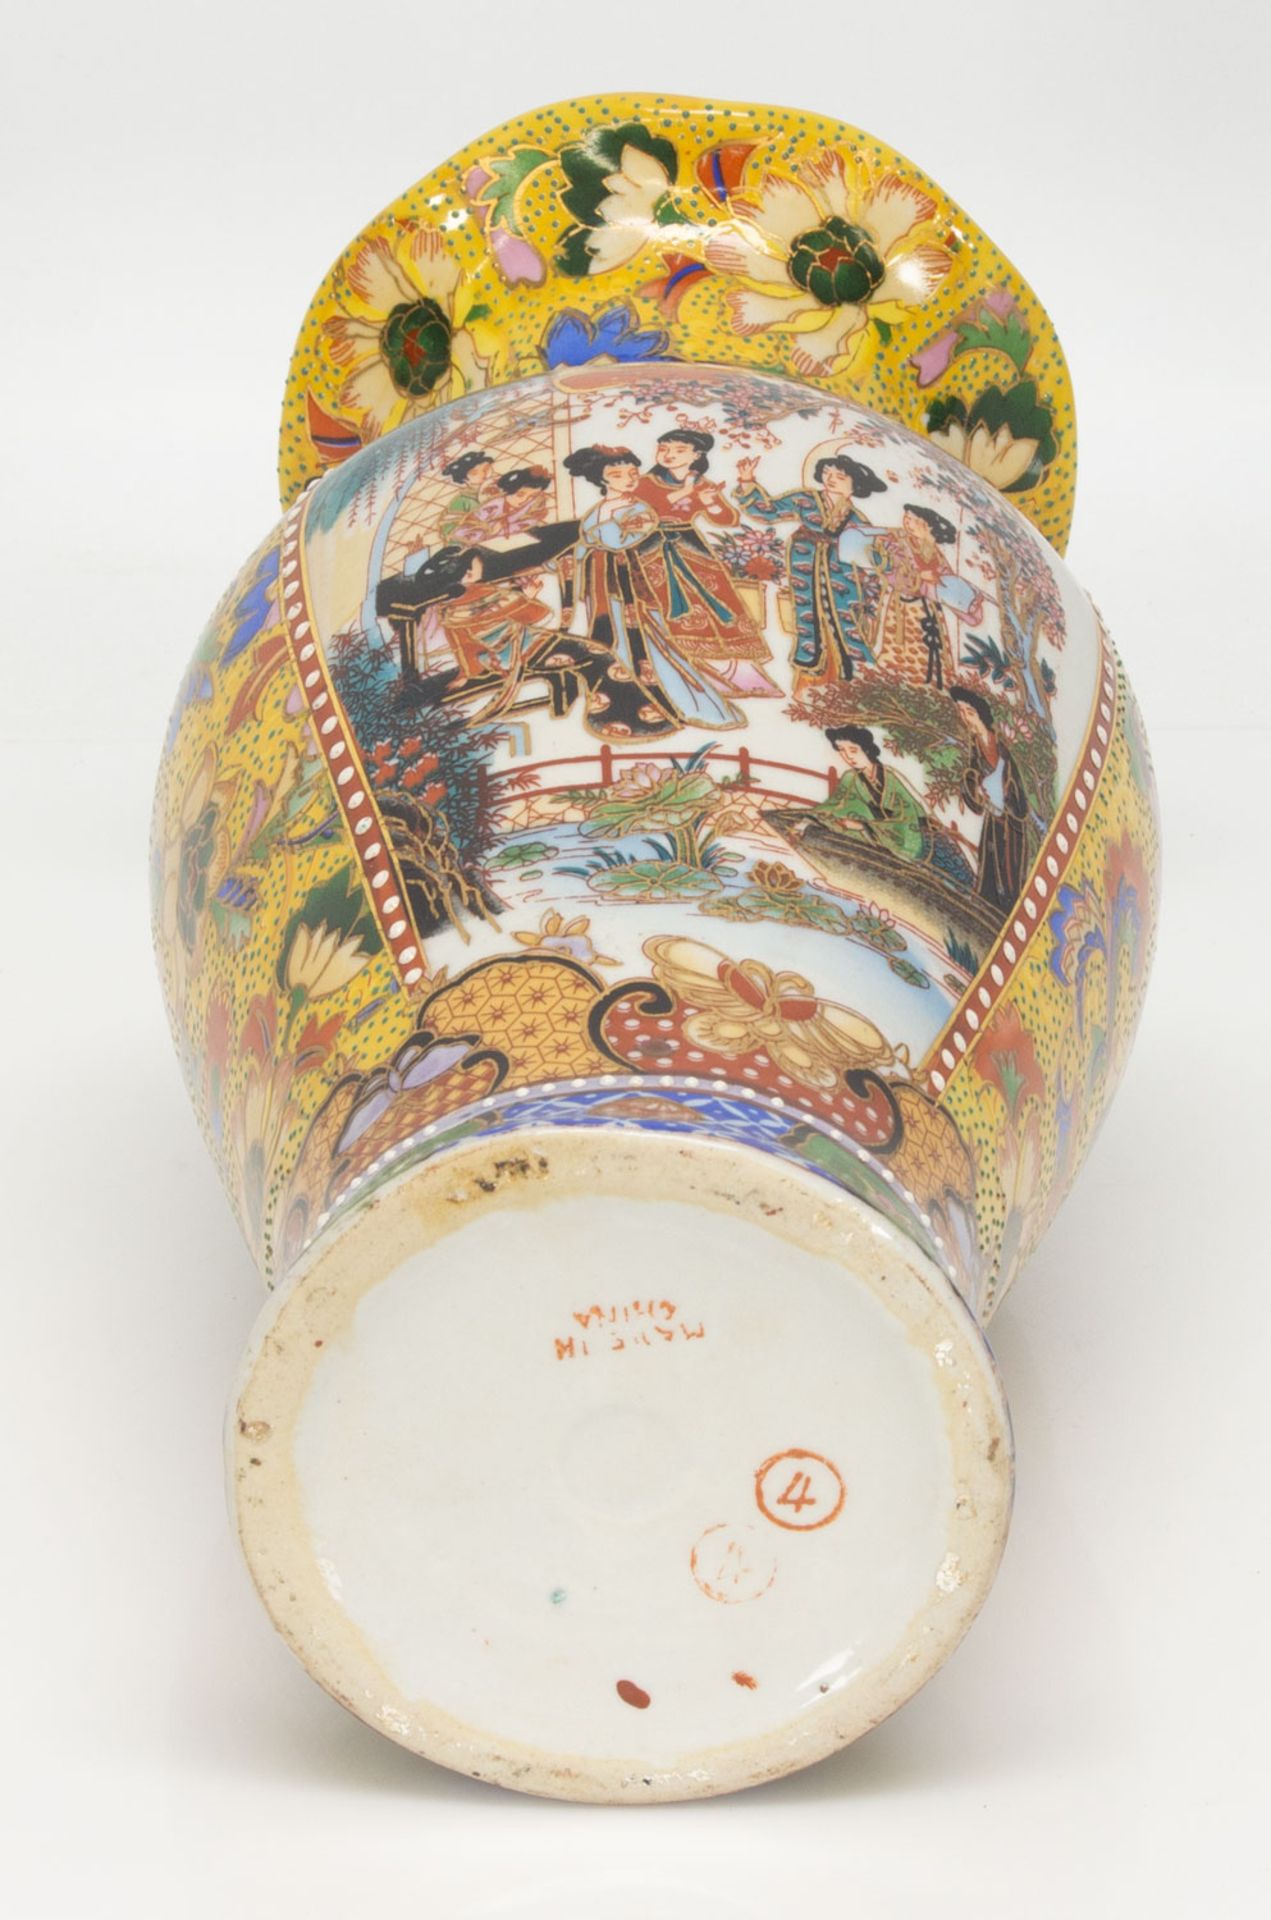 Bodenvase - Image 3 of 3